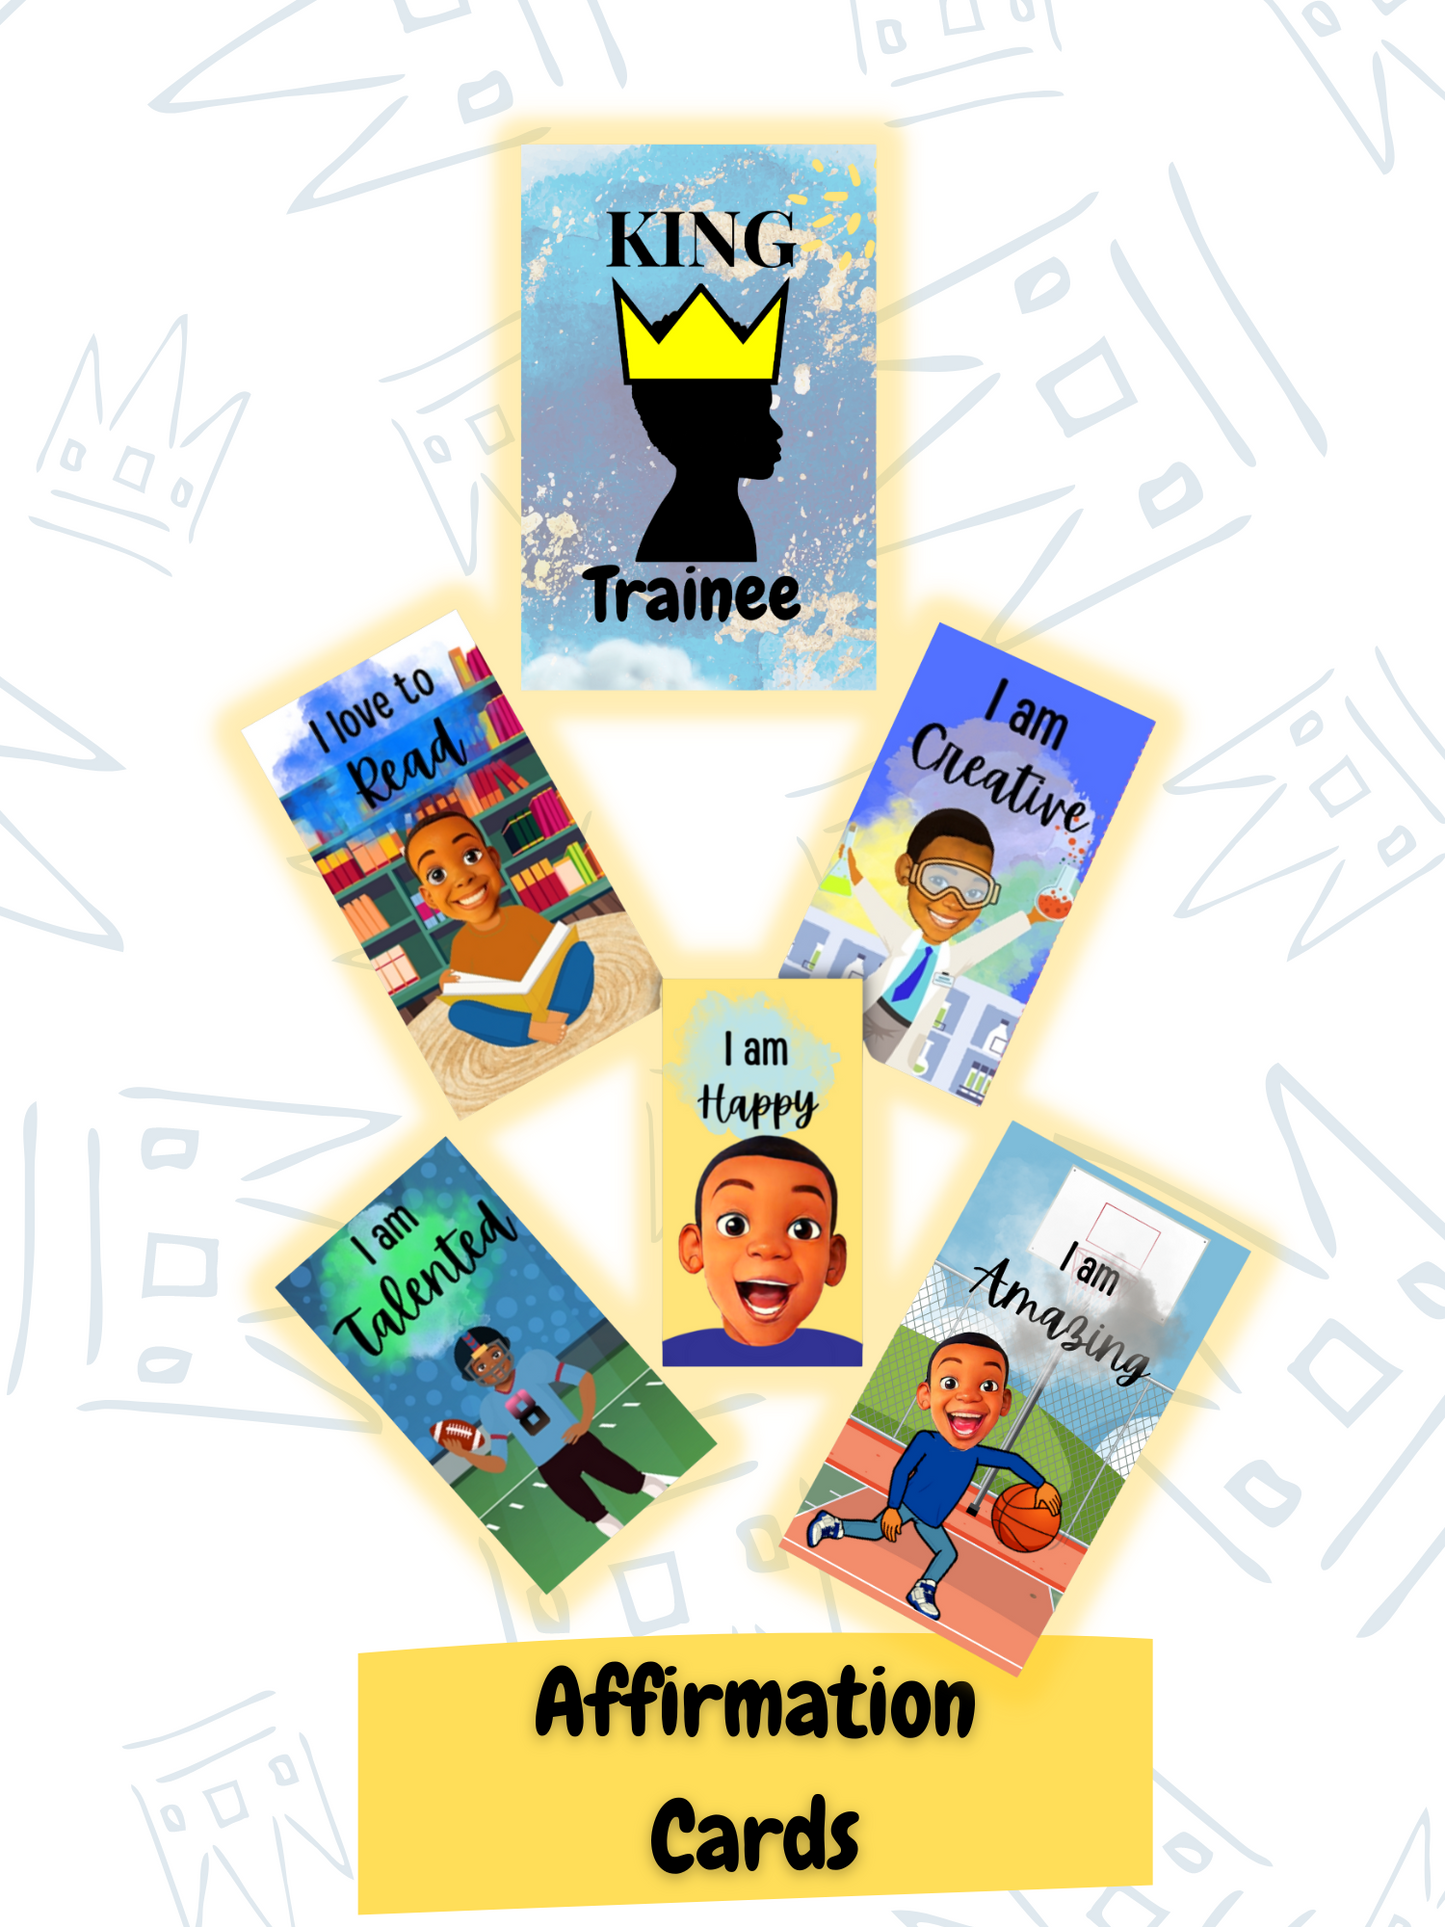 King Trainee Affirmation Card Deck (30 count)